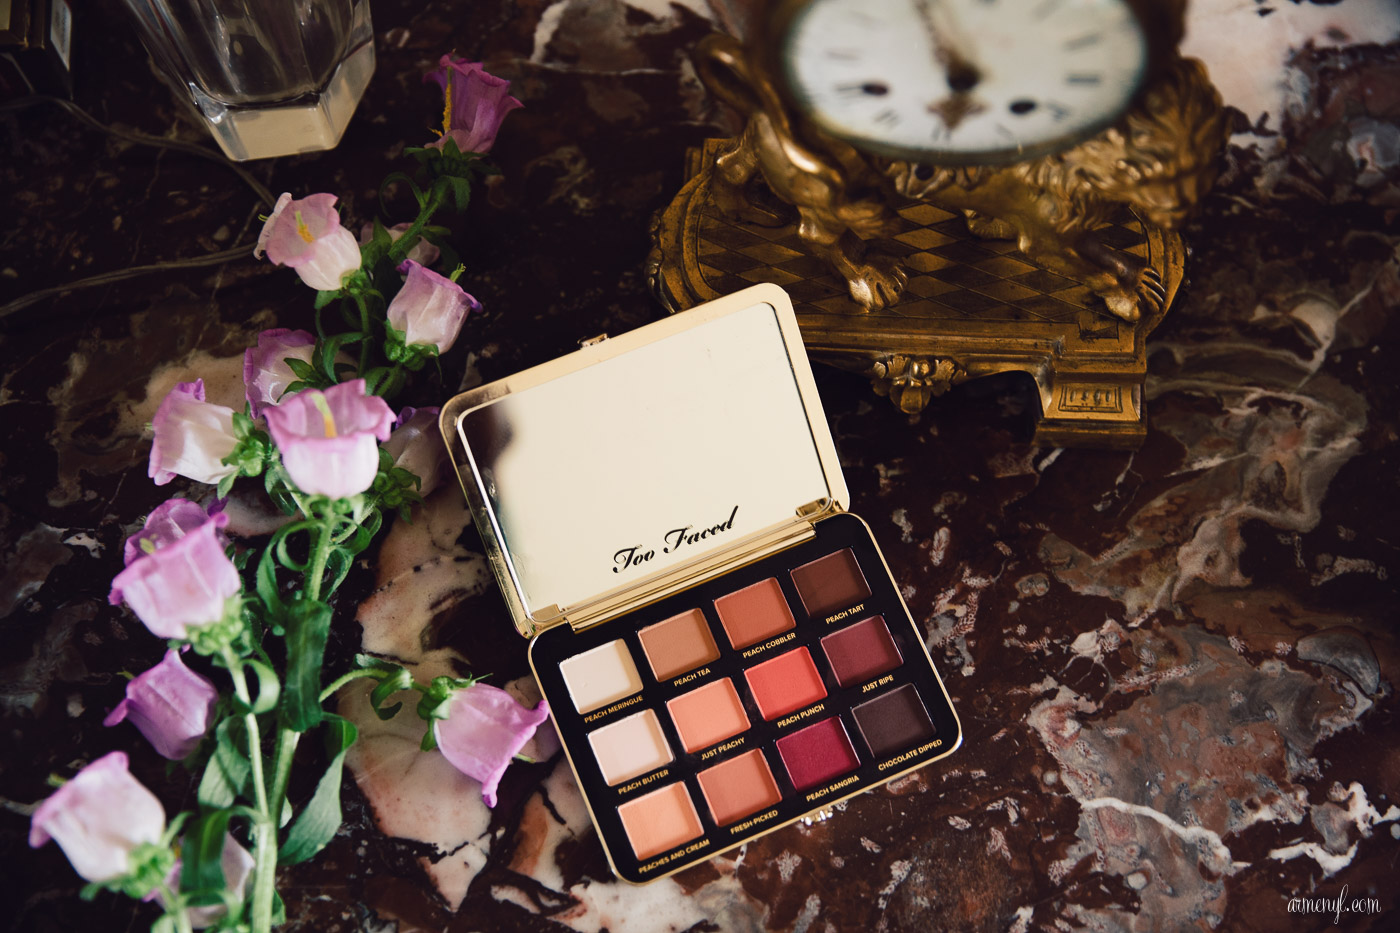 Too Faced Just Peachy Mattes Eyeshadow Palettes photo by Armenyl